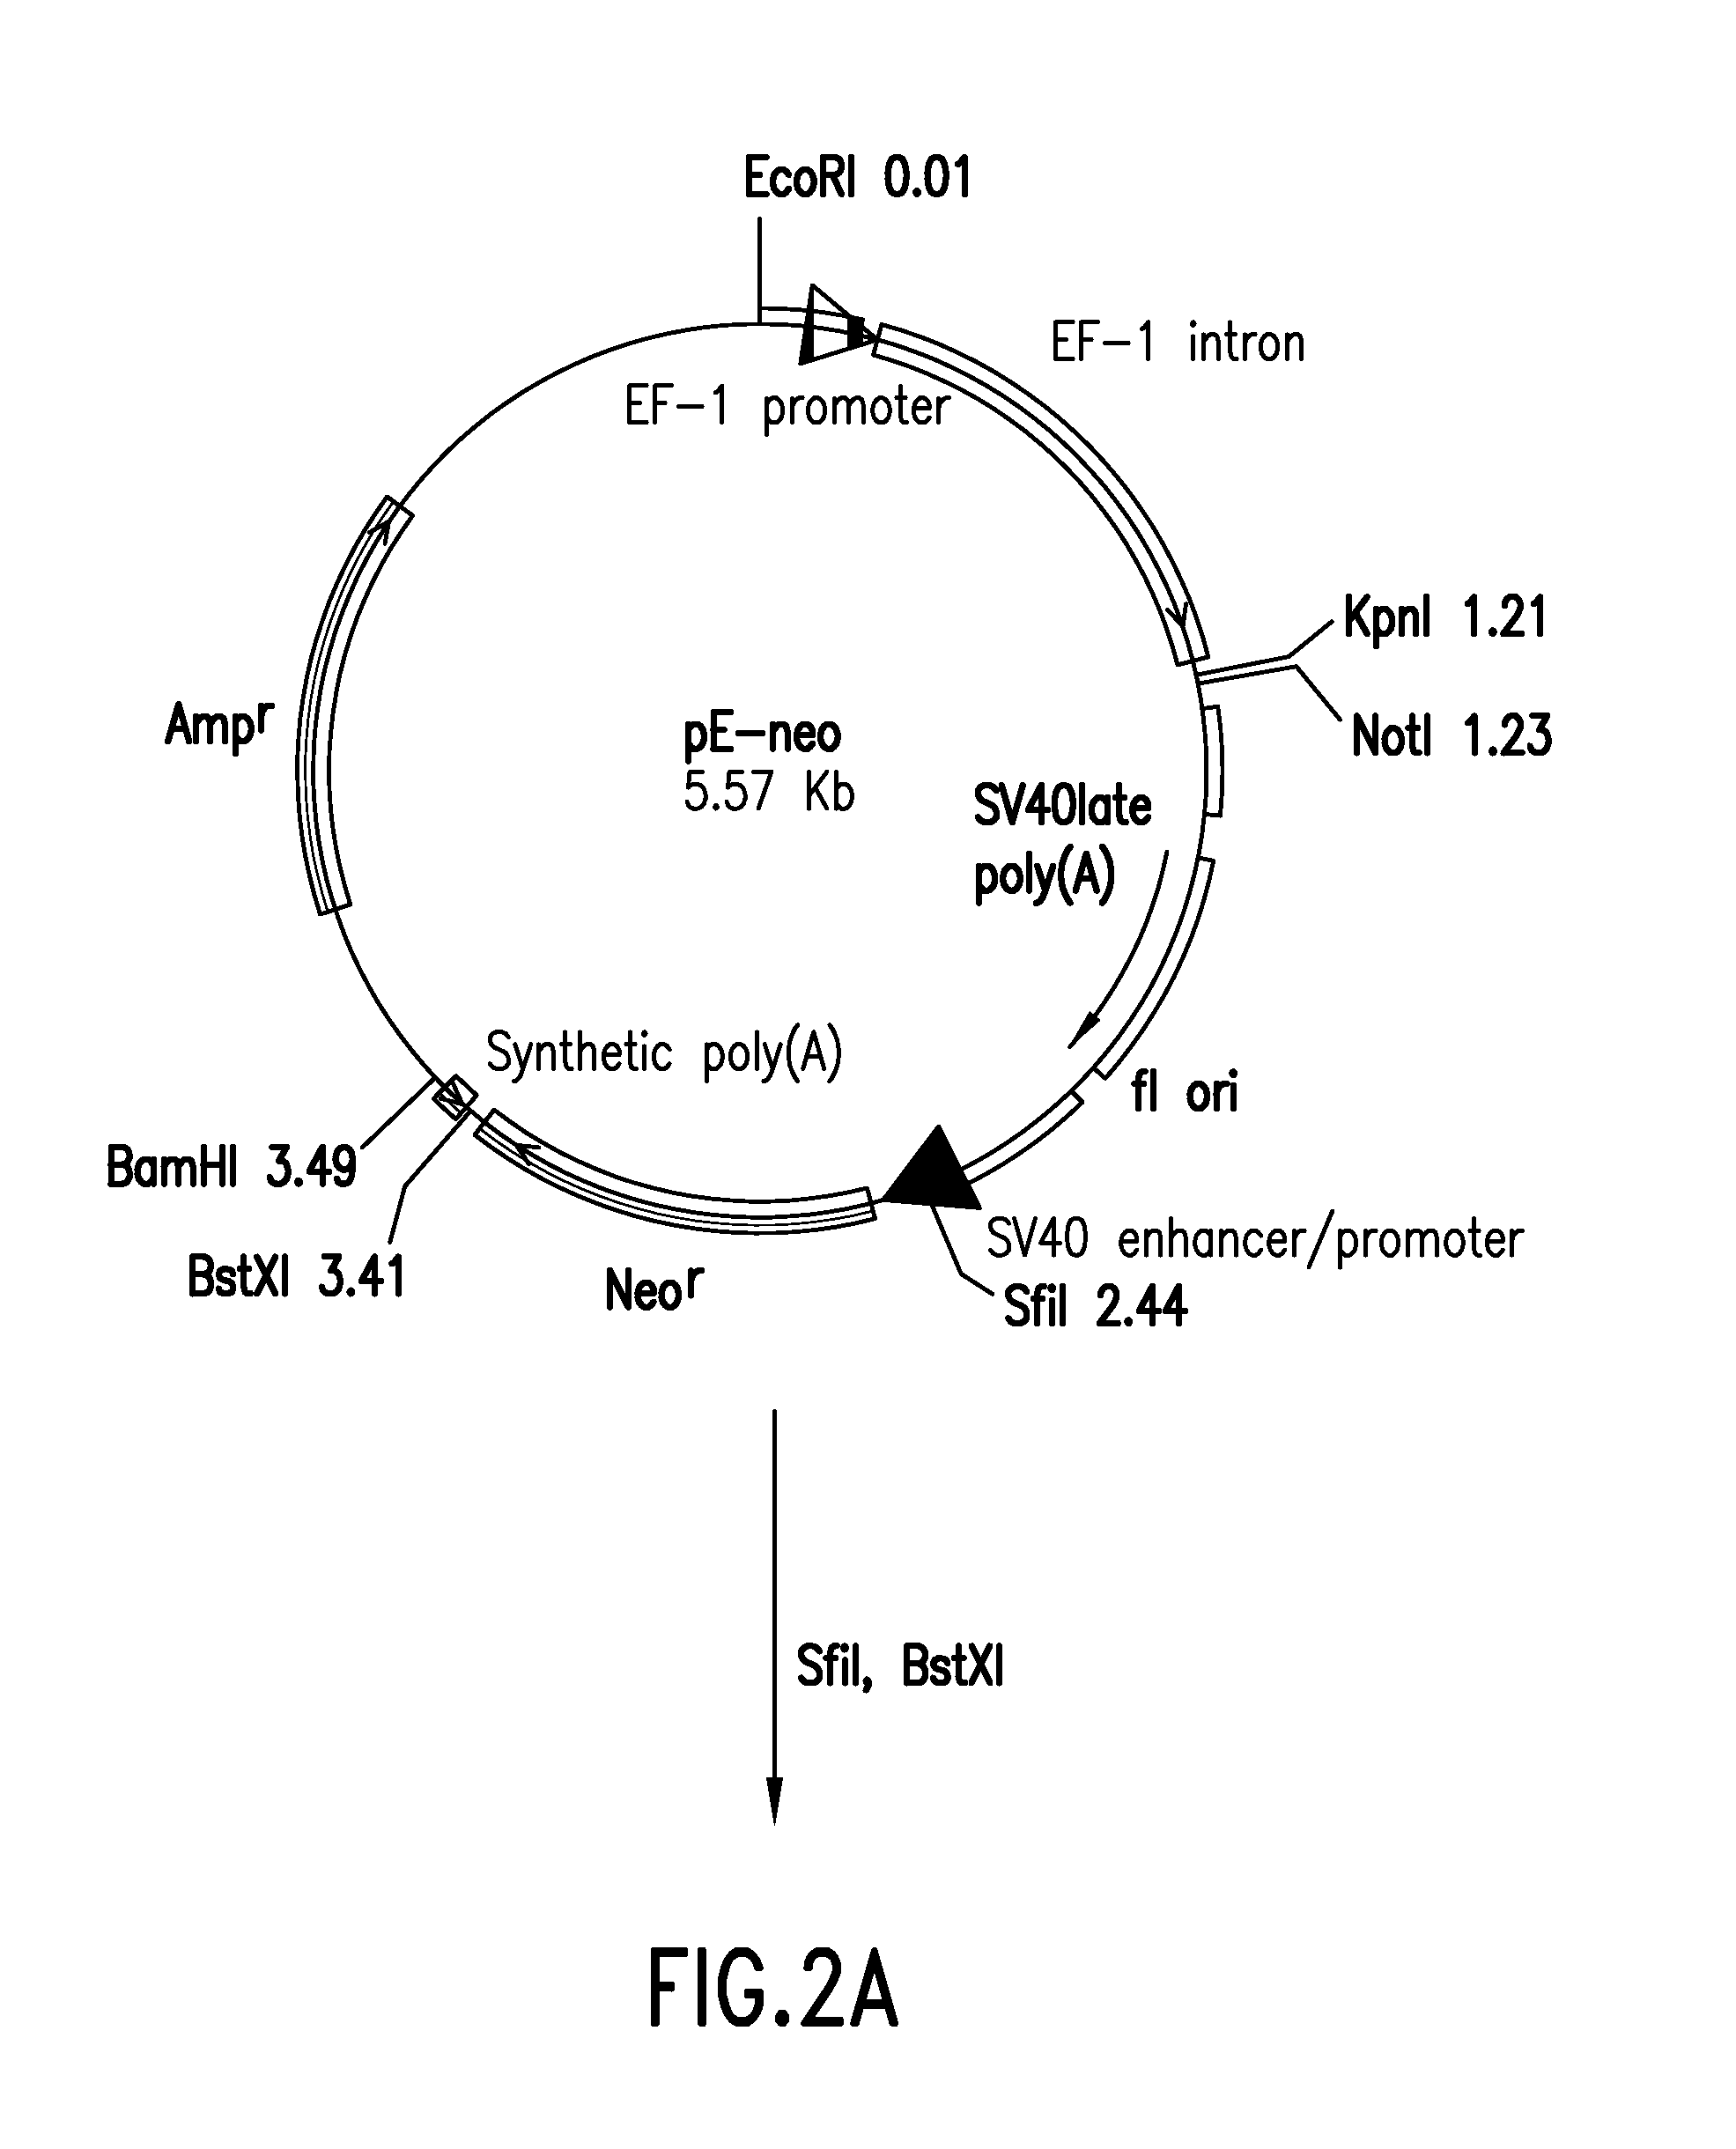 Method for Production of Recombinant Human FSH